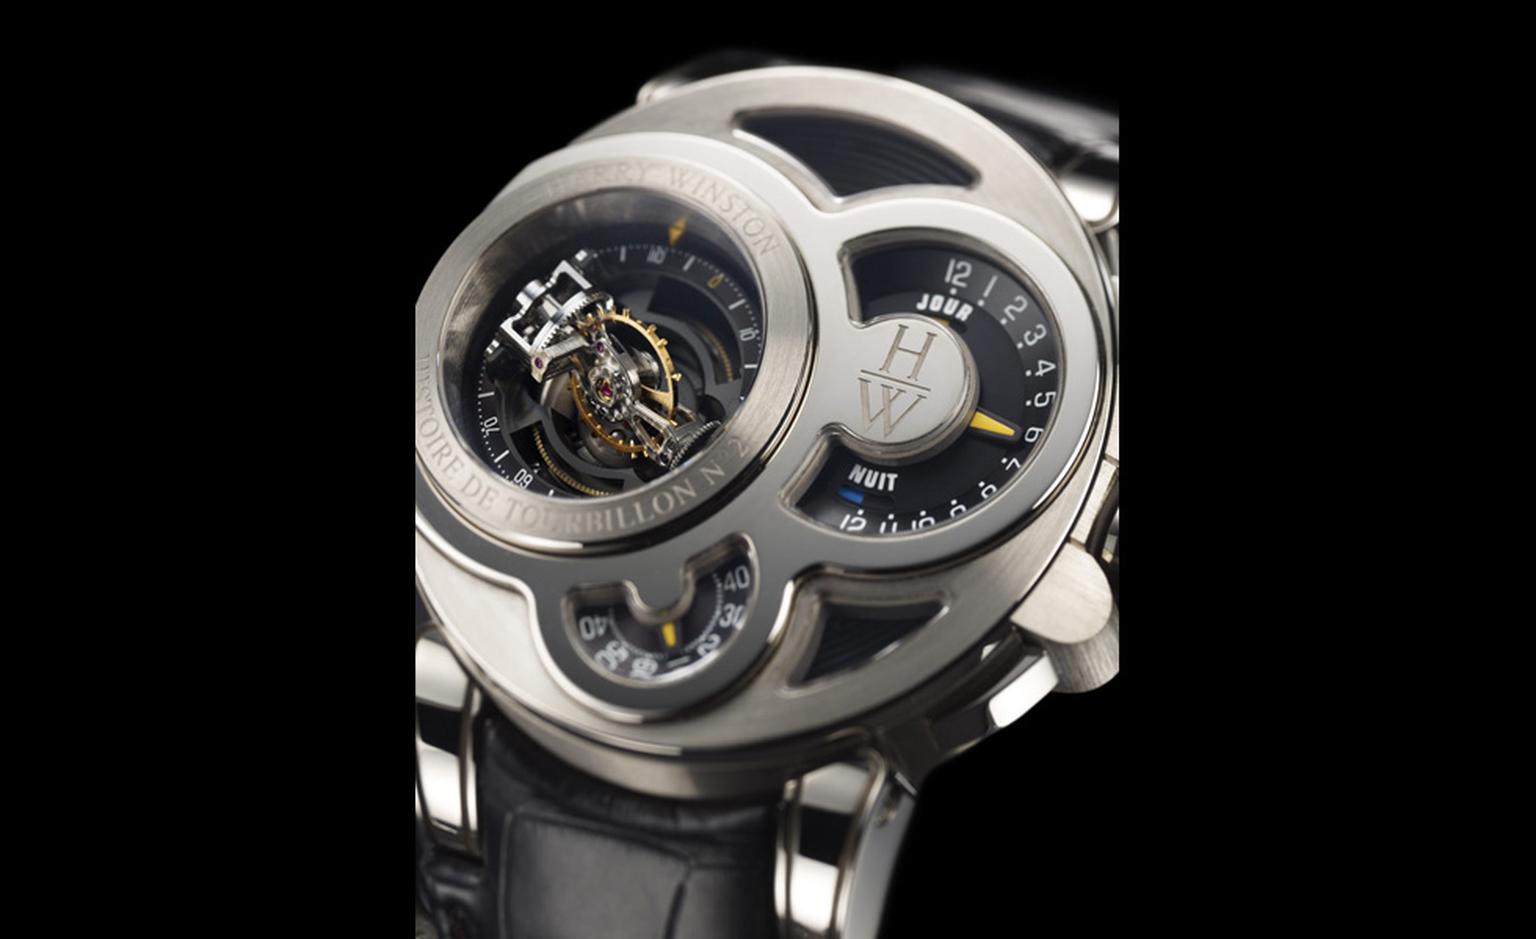 Harry Winston Histoire de Tourbillon presents another twist in the winding tale of the tourbillon. This bi-axial tourbillon appears to float as it is anchor is invisible.